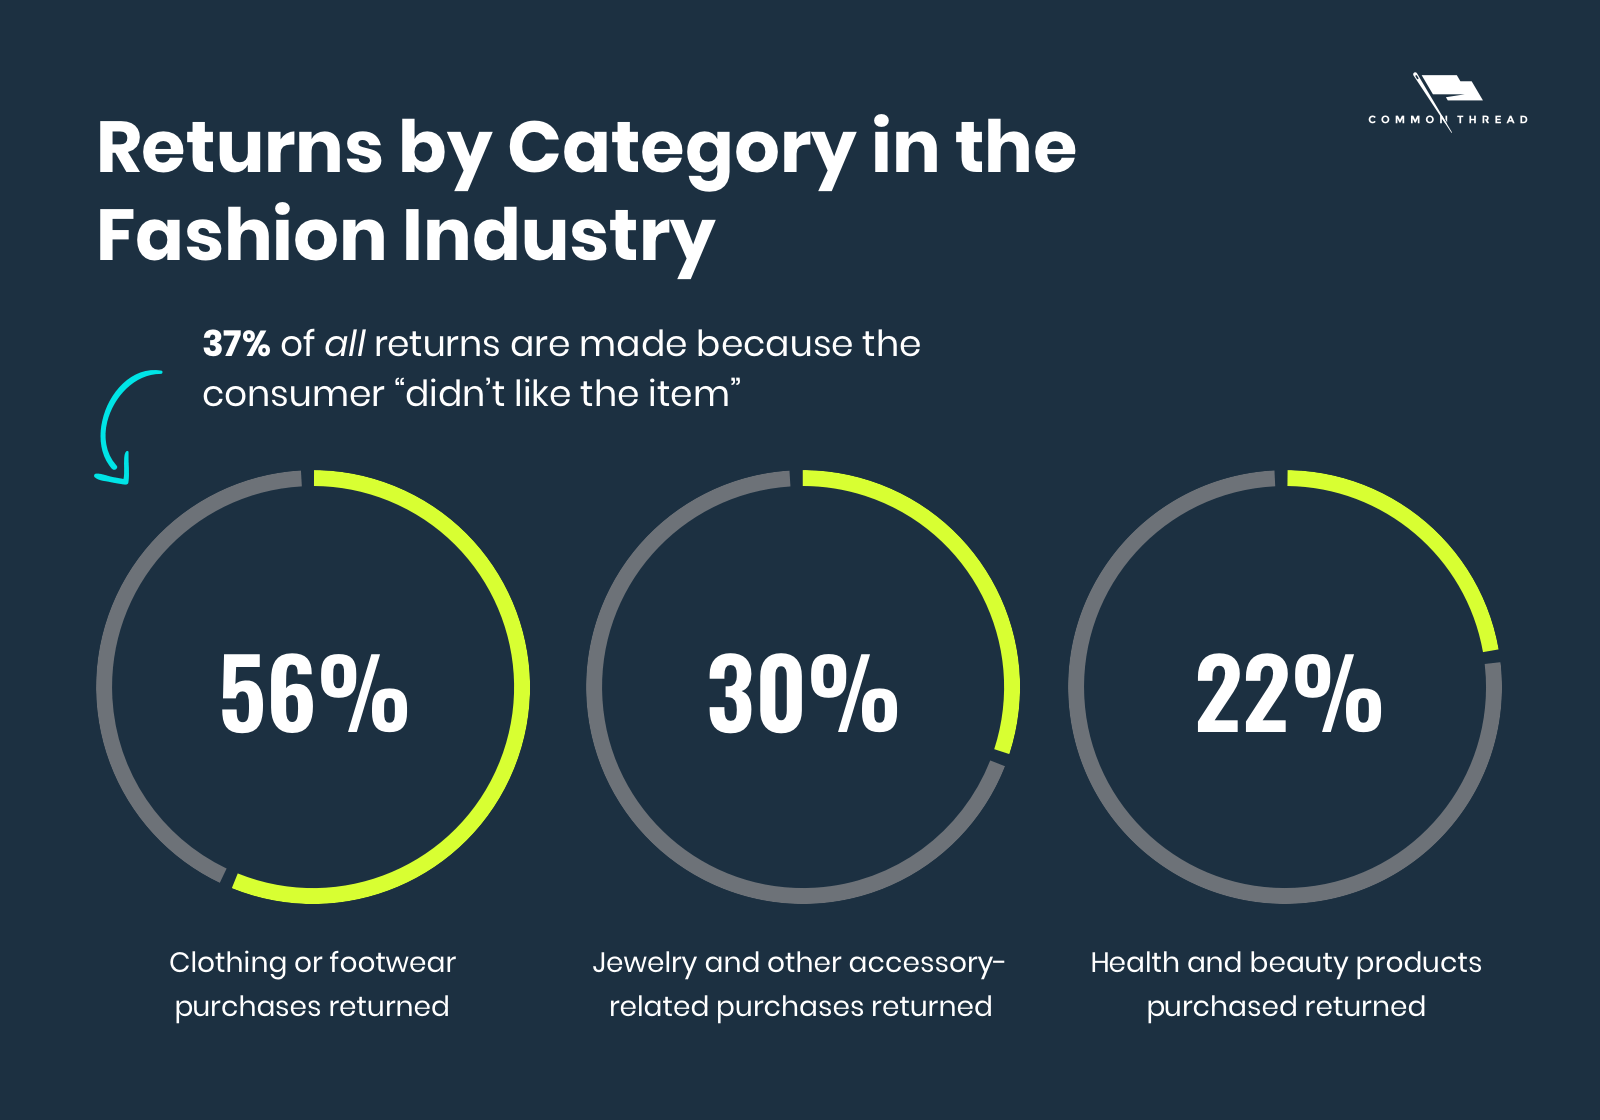 Returns by category in the fashion industry